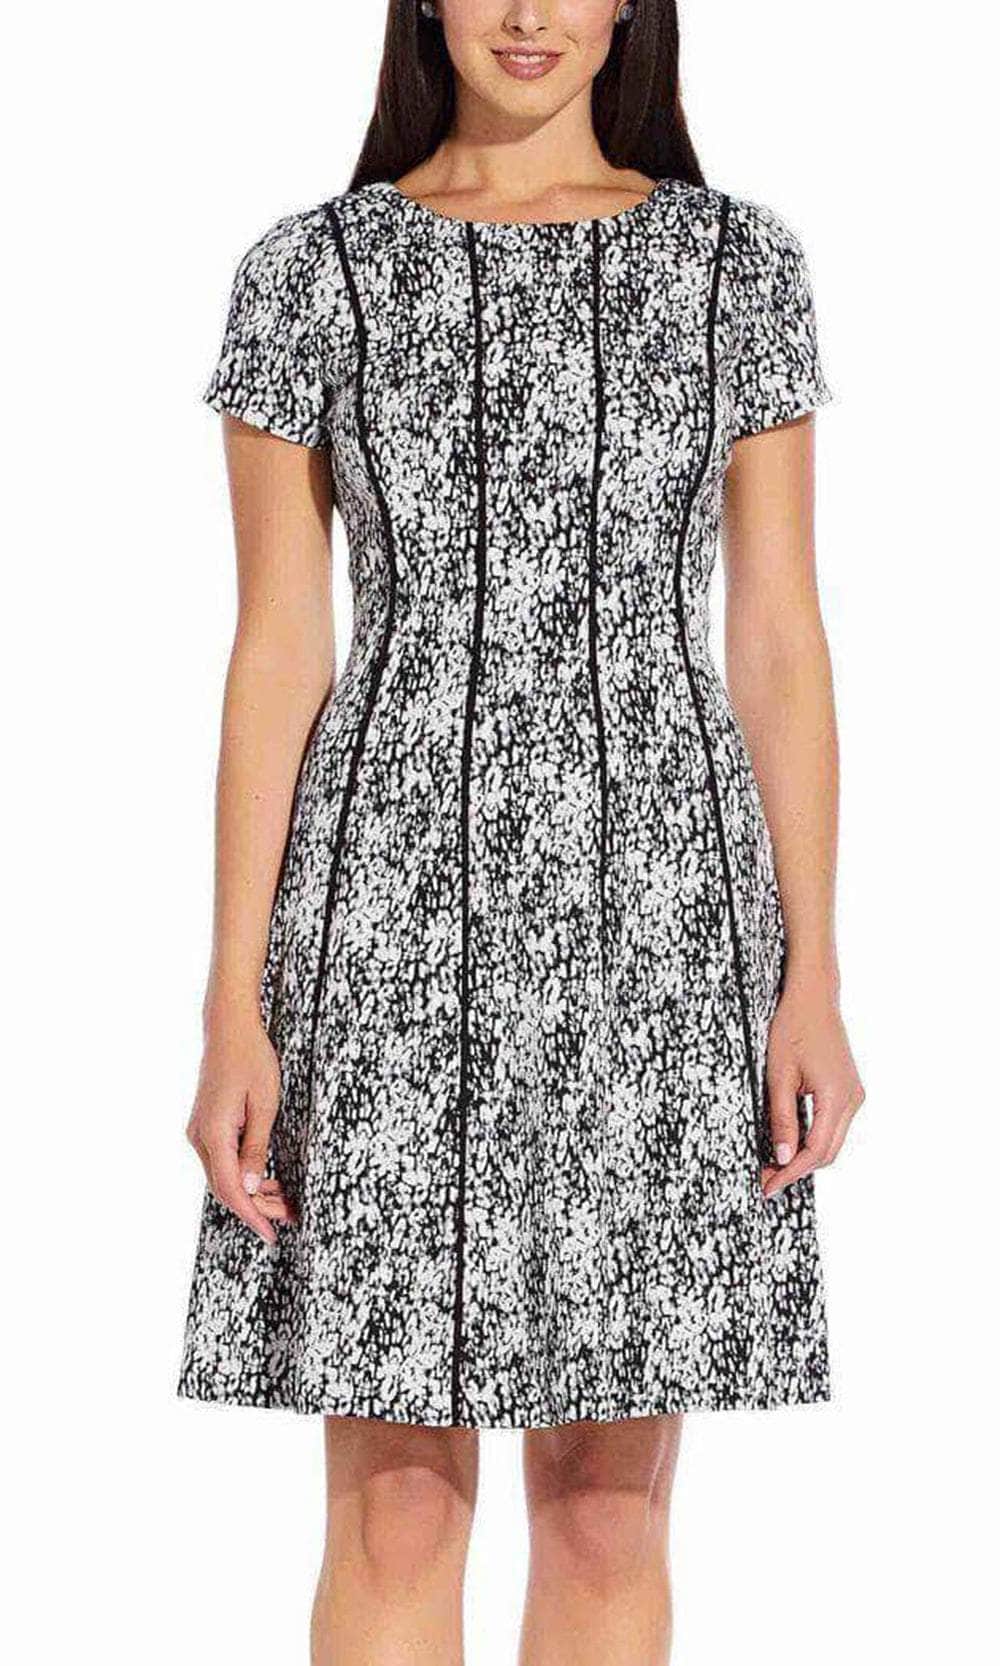 Adrianna Papell AP1D103579 - Scoop Jacquard Cocktail Dress